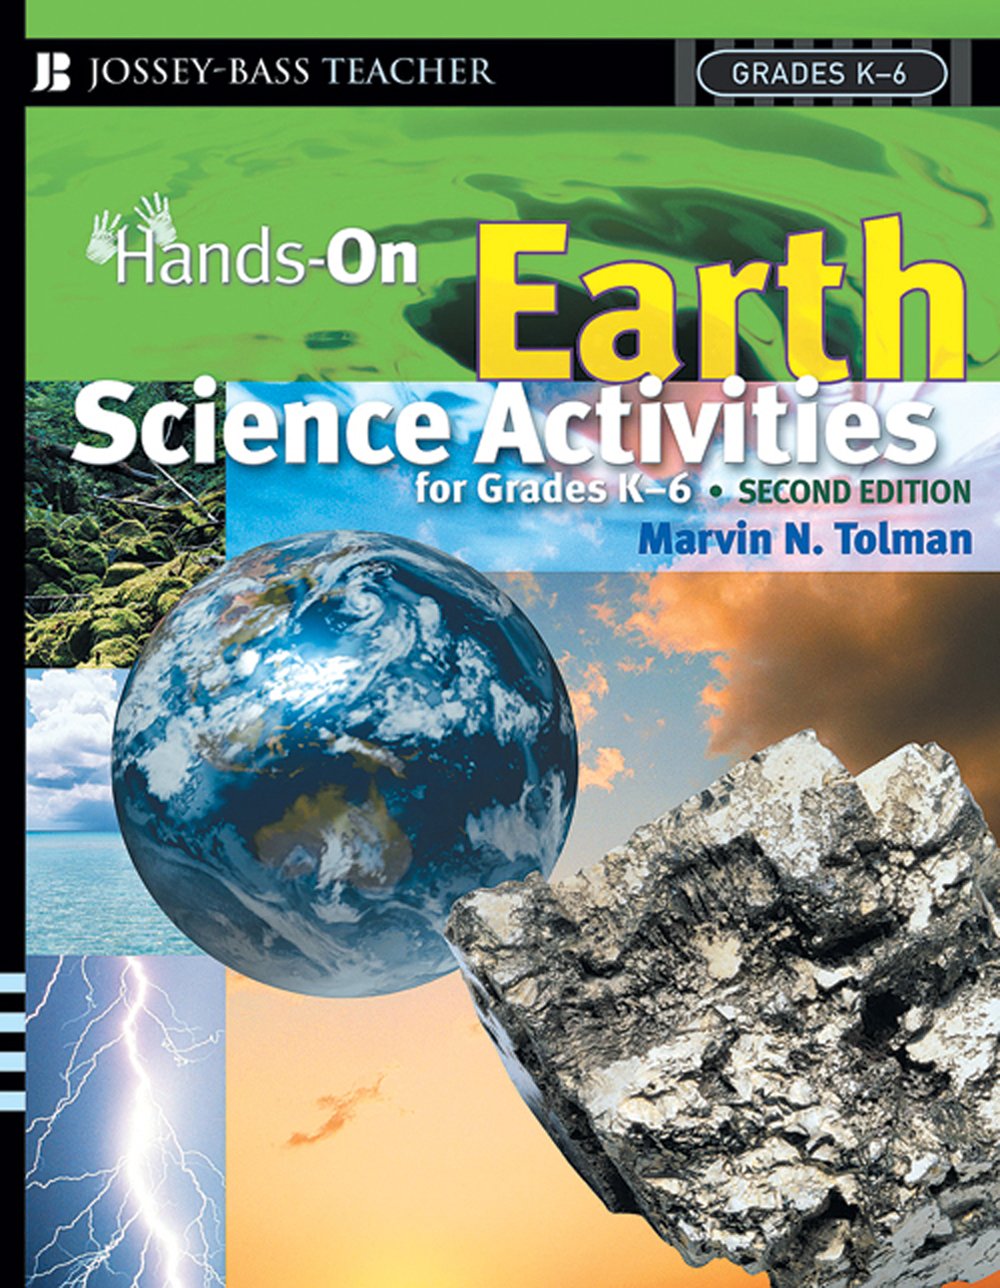 Hands-On Earth Science Activities for Grades K-6 (2nd Edition)